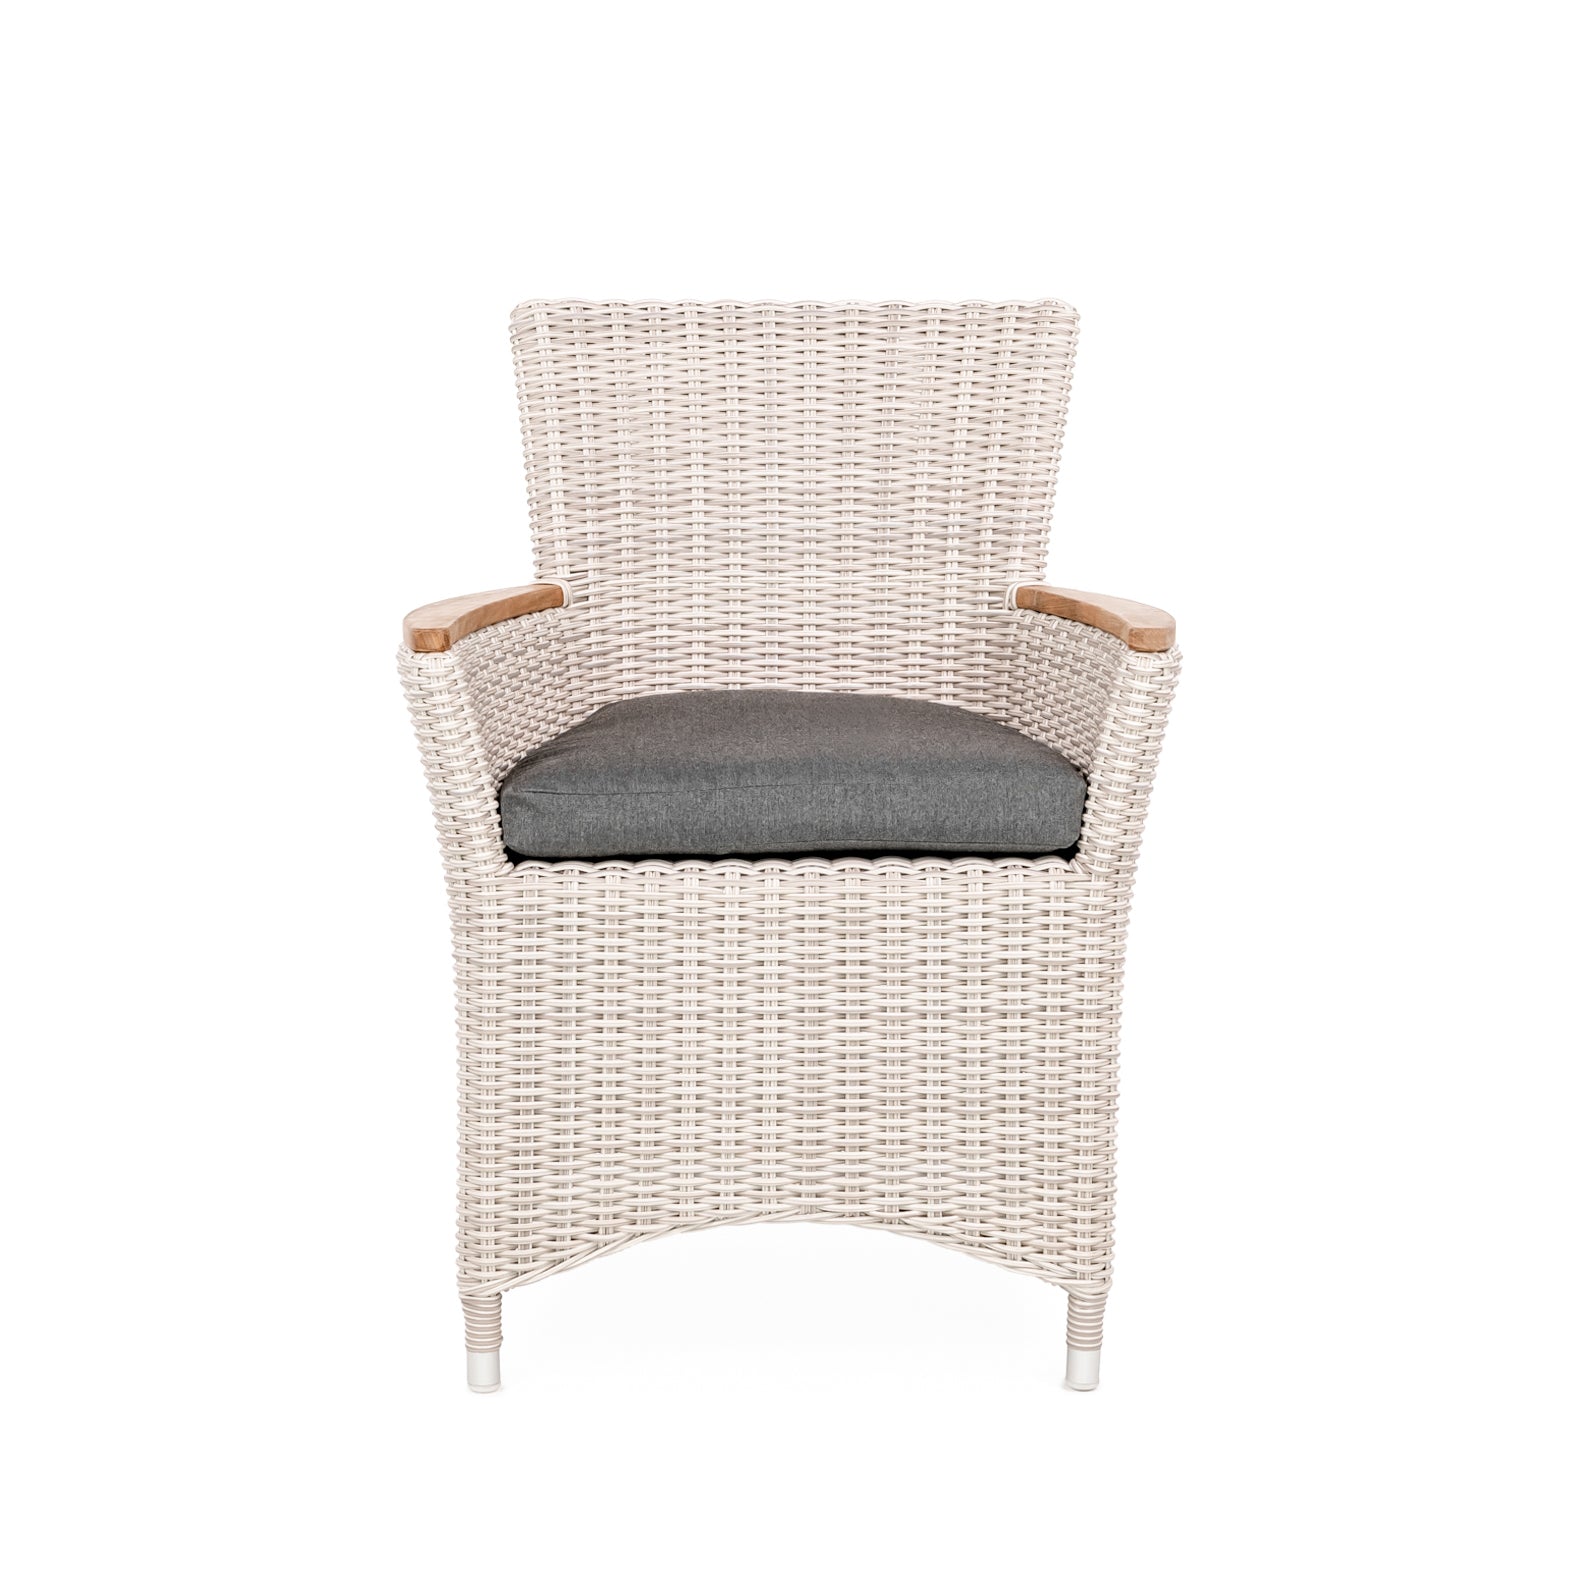 Oyster Bay Dining Chair